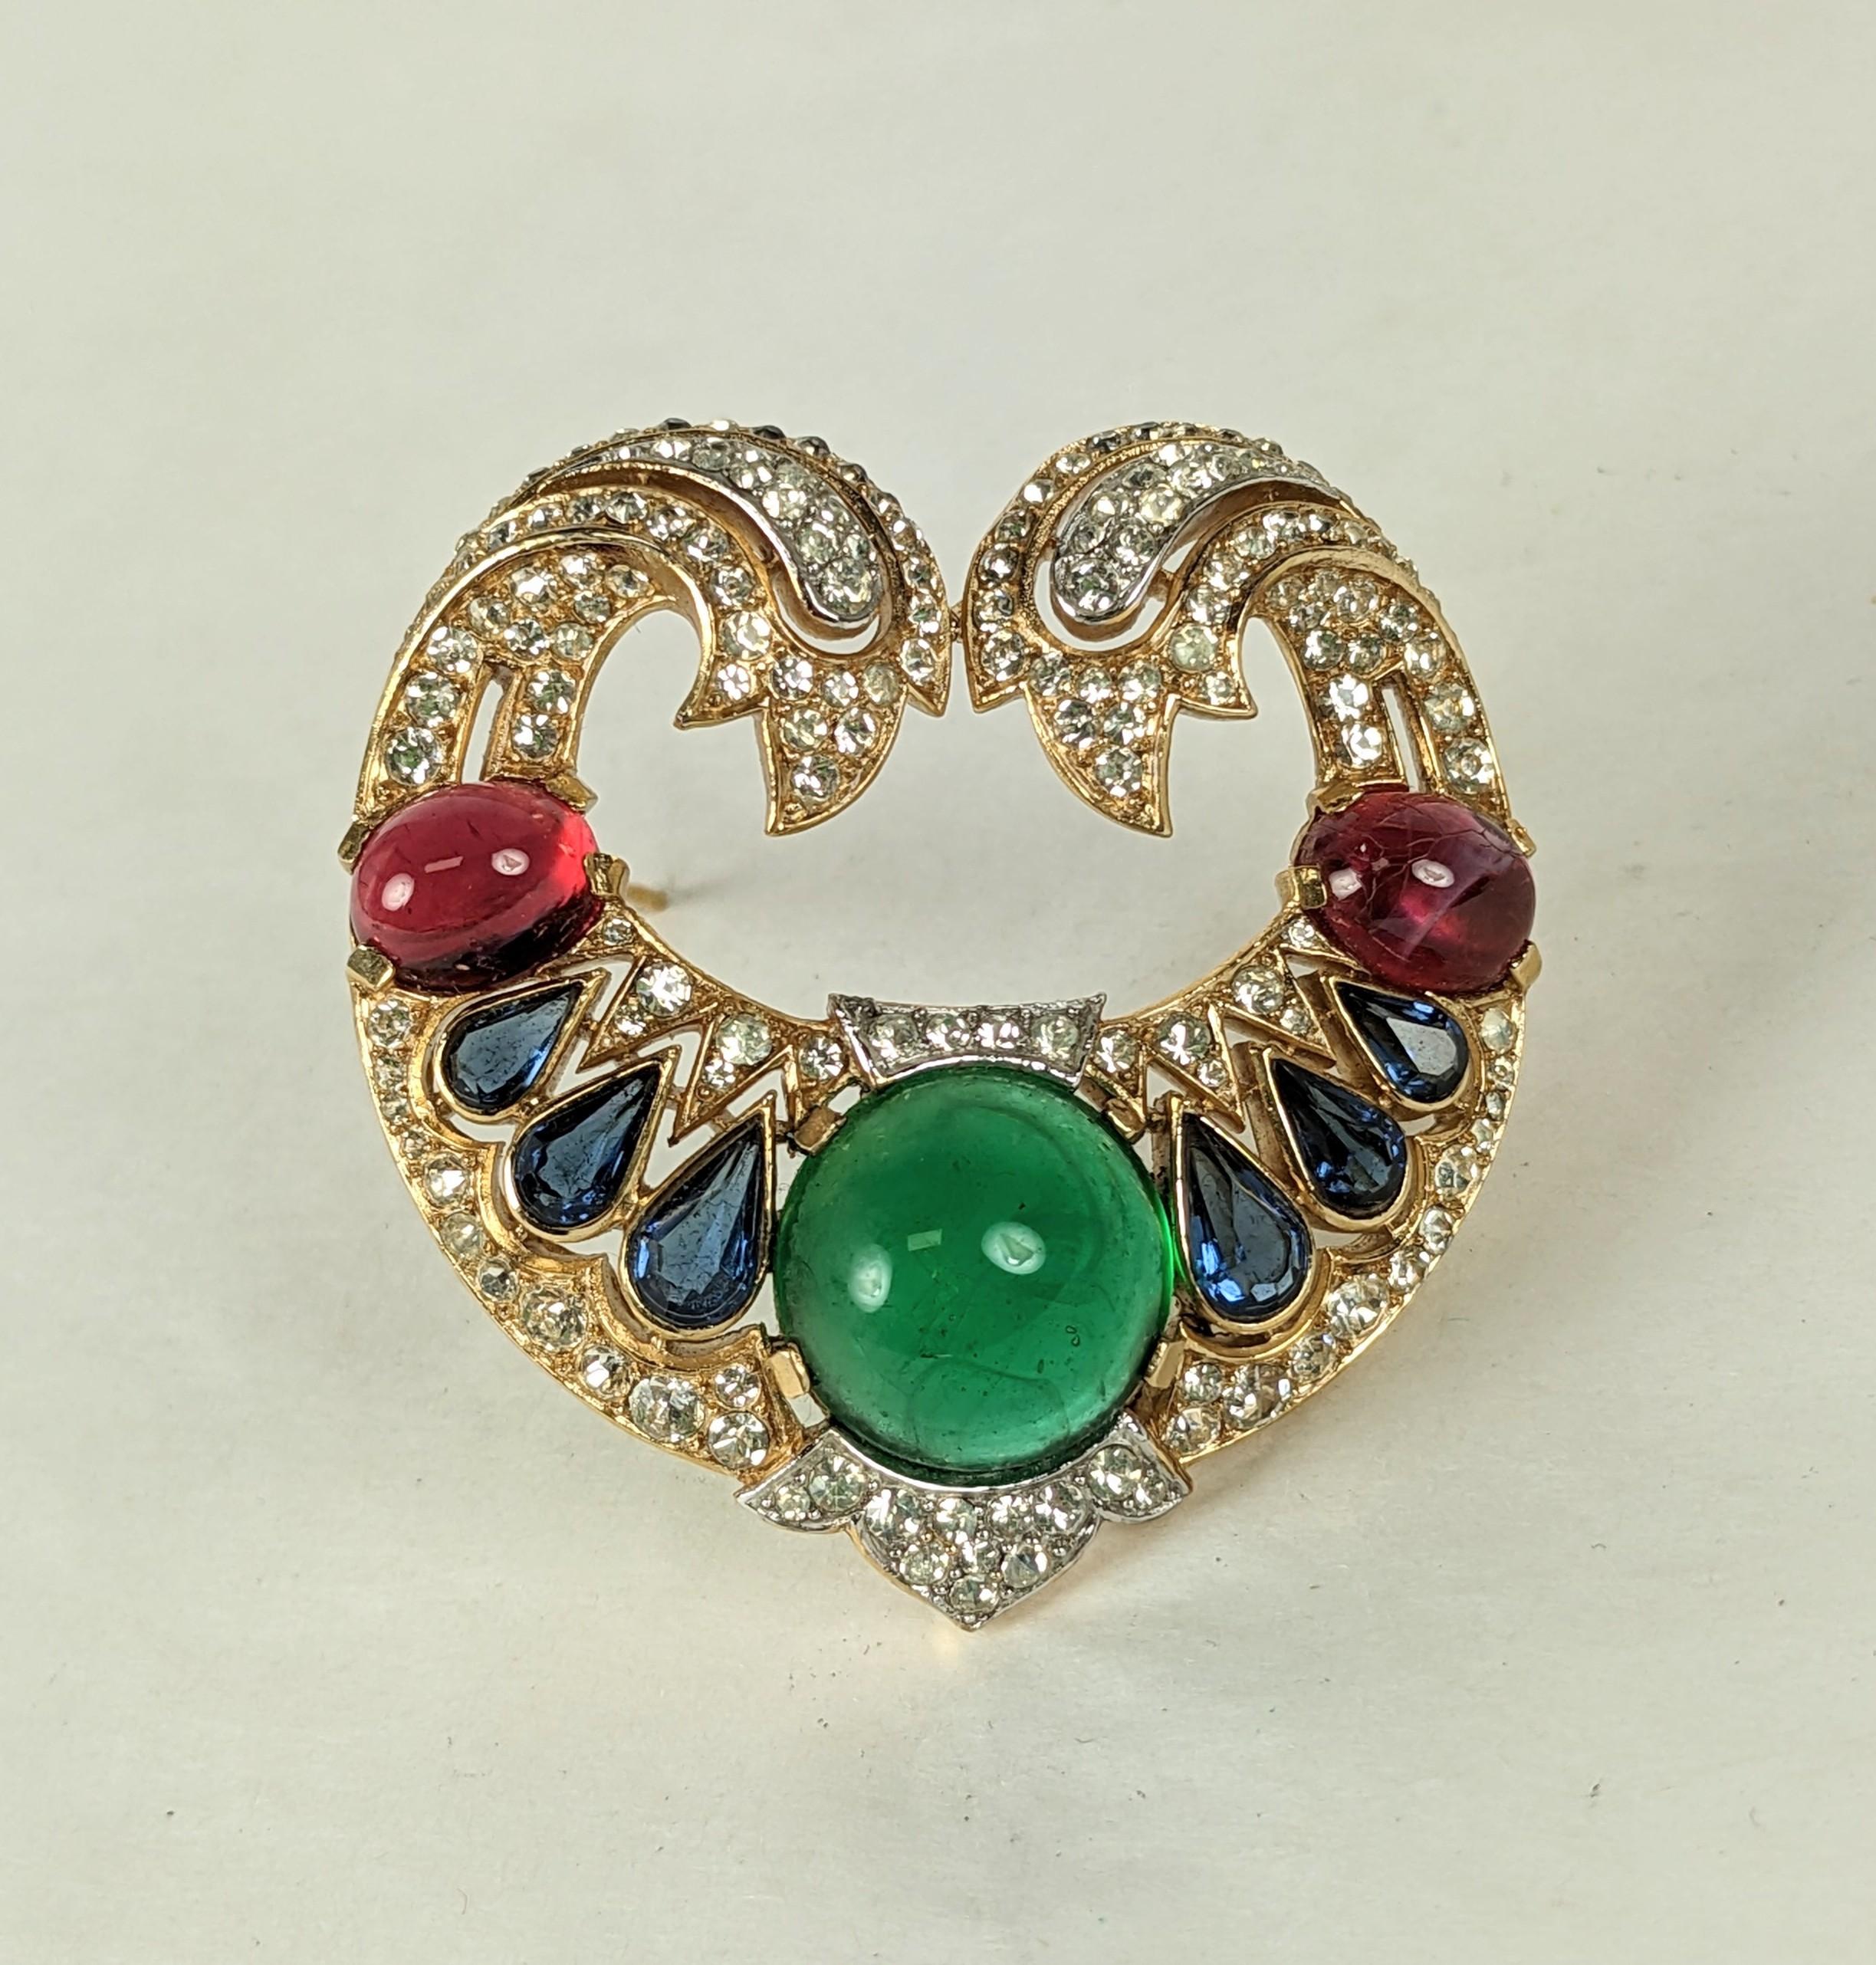 Rare Trifari Jewels of India Brooch from the Moghul series. Elaborate pave crystal stone work set in both gilt and rhodium metal with cabochon stones in jewel tones. 
1960's USA. 2